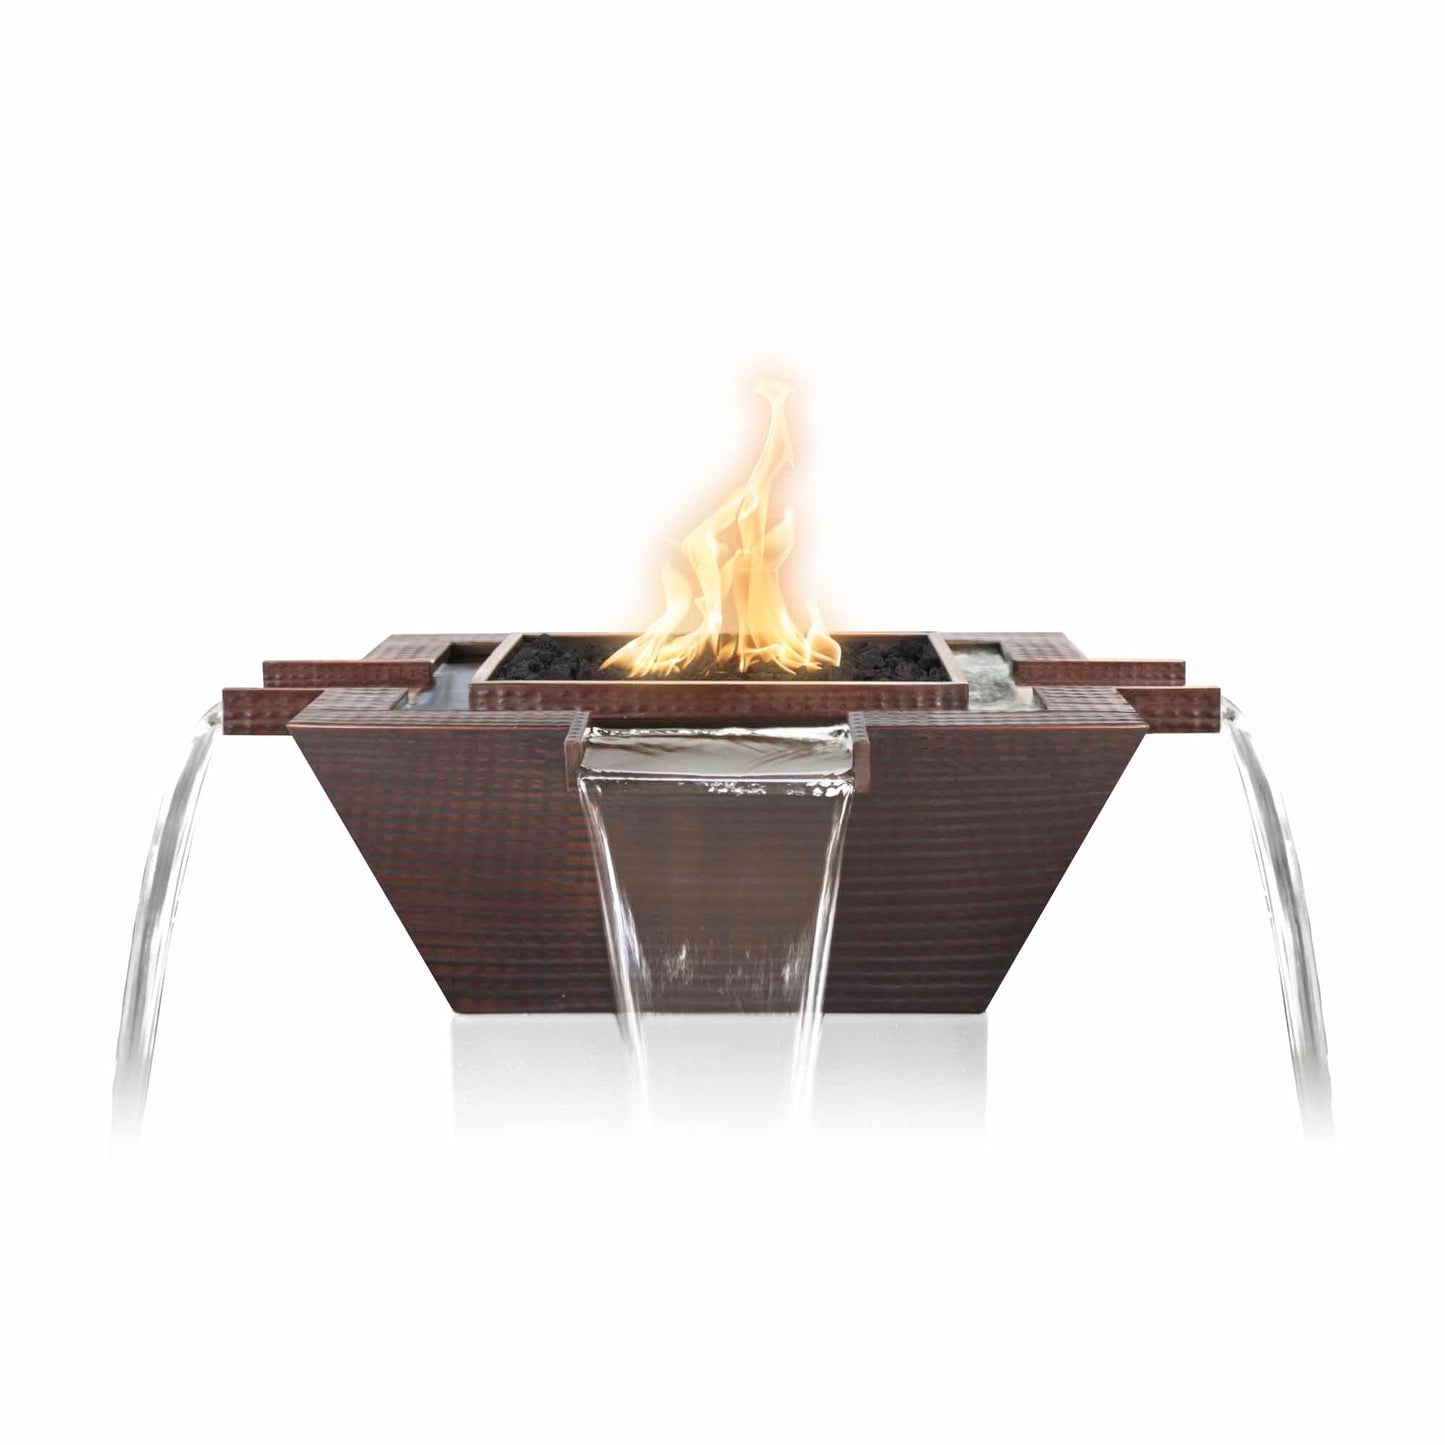 The Outdoor Plus Square Maya 30" Black Powder Coated Metal Liquid Propane Fire & Water Bowl 4-Way Spill with Match Lit Ignition